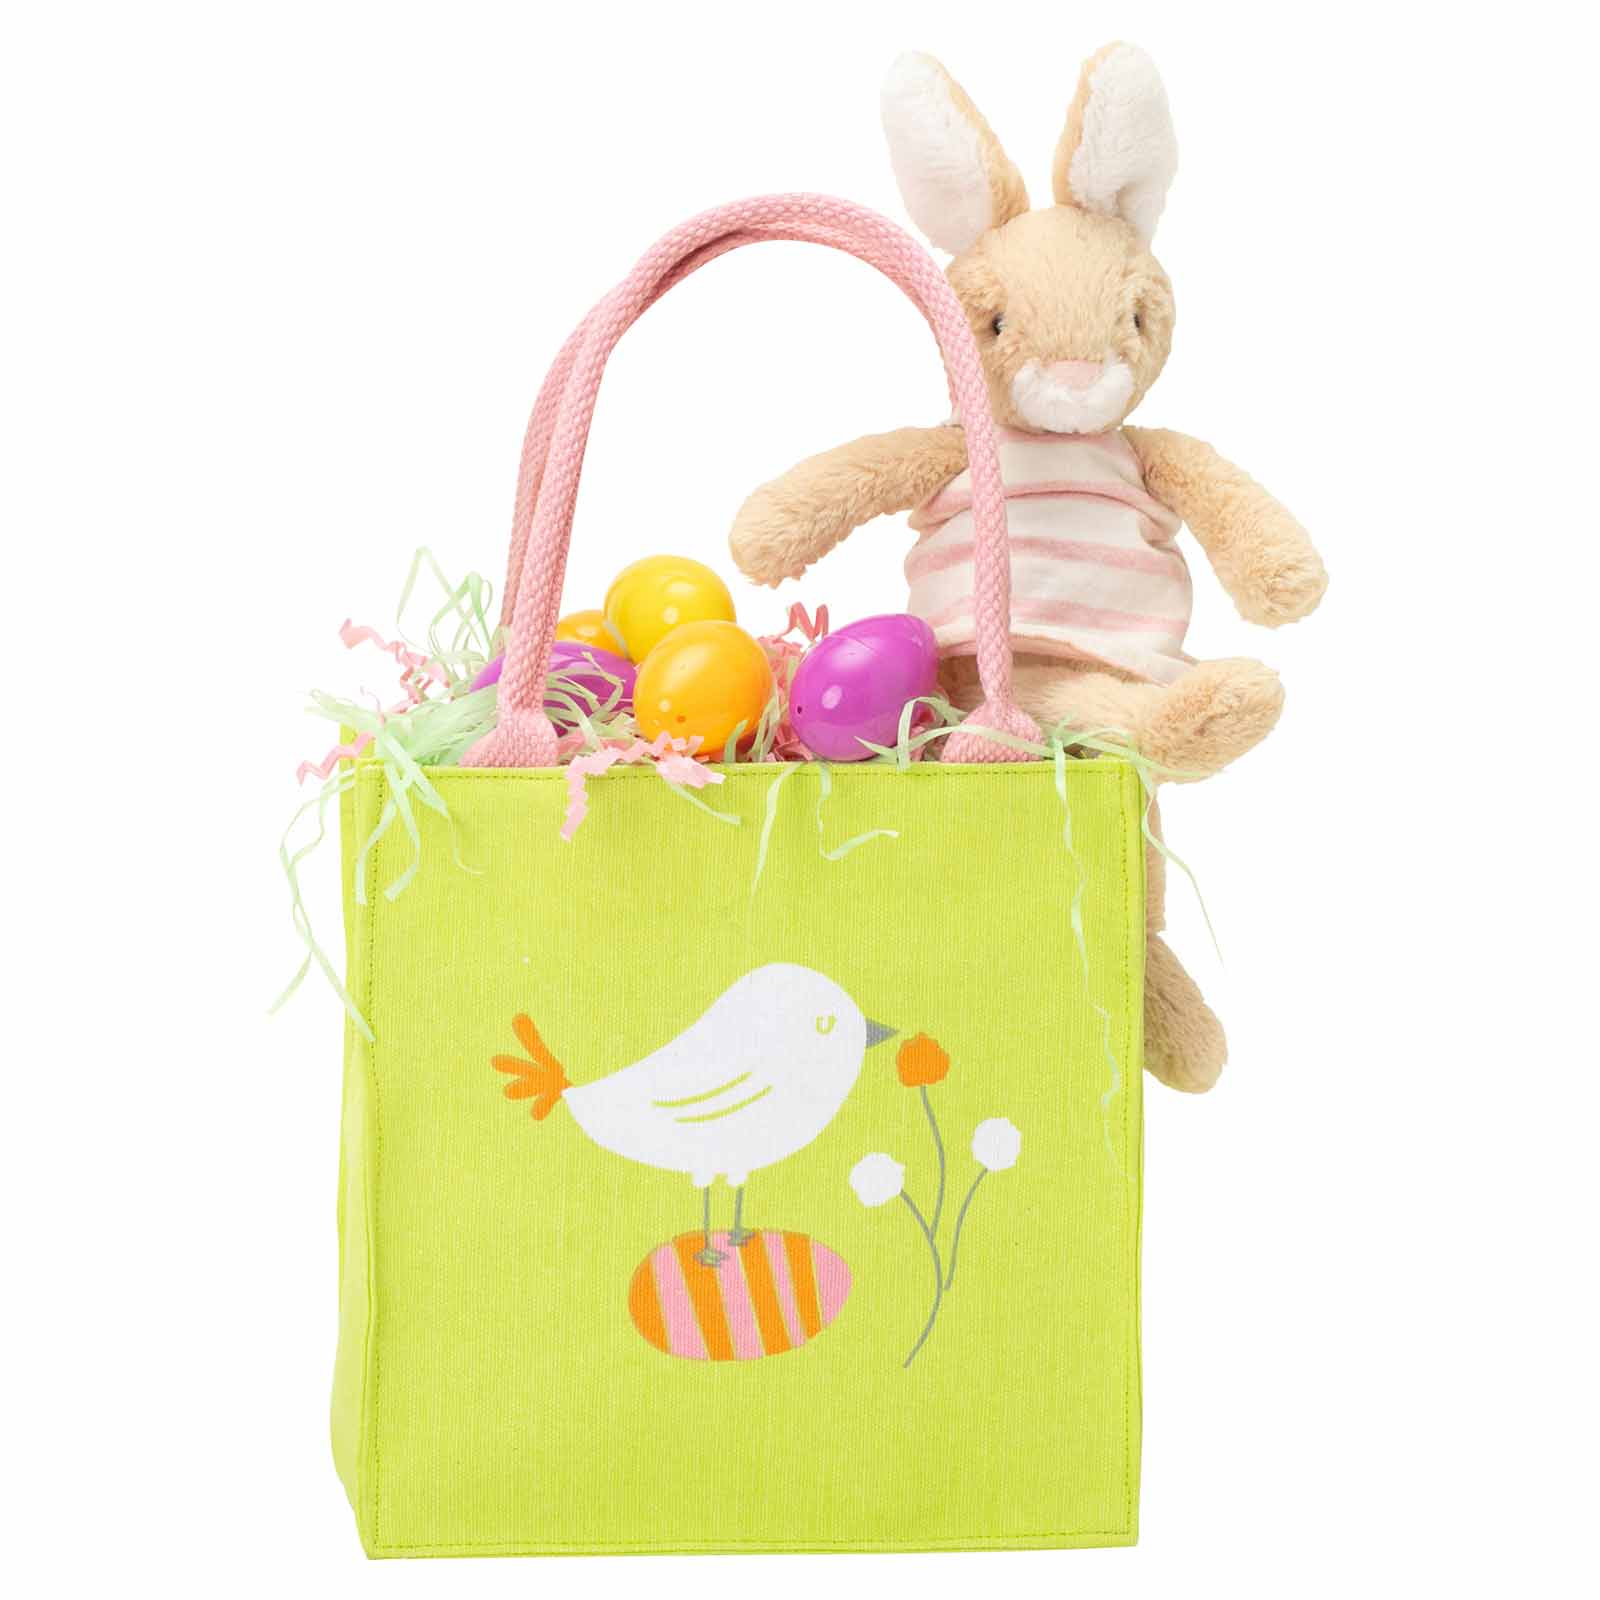 EASTER CHICK Itsy Bitsy Reusable Easter Gift Tote